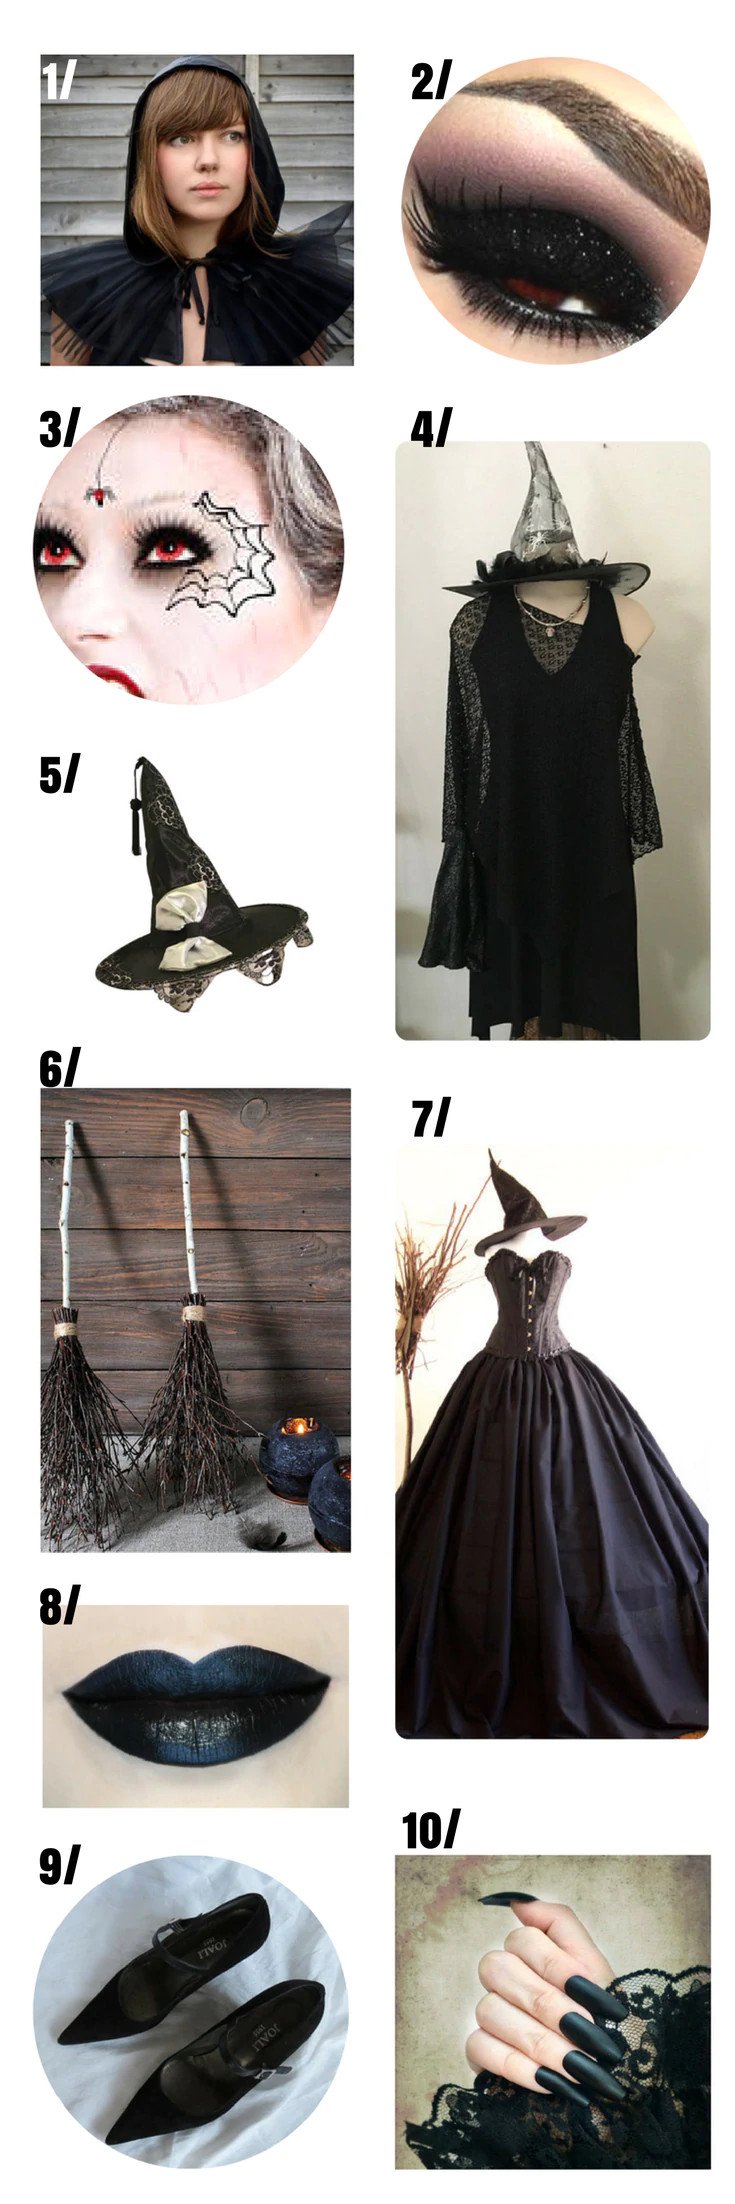 Witch costume for women.